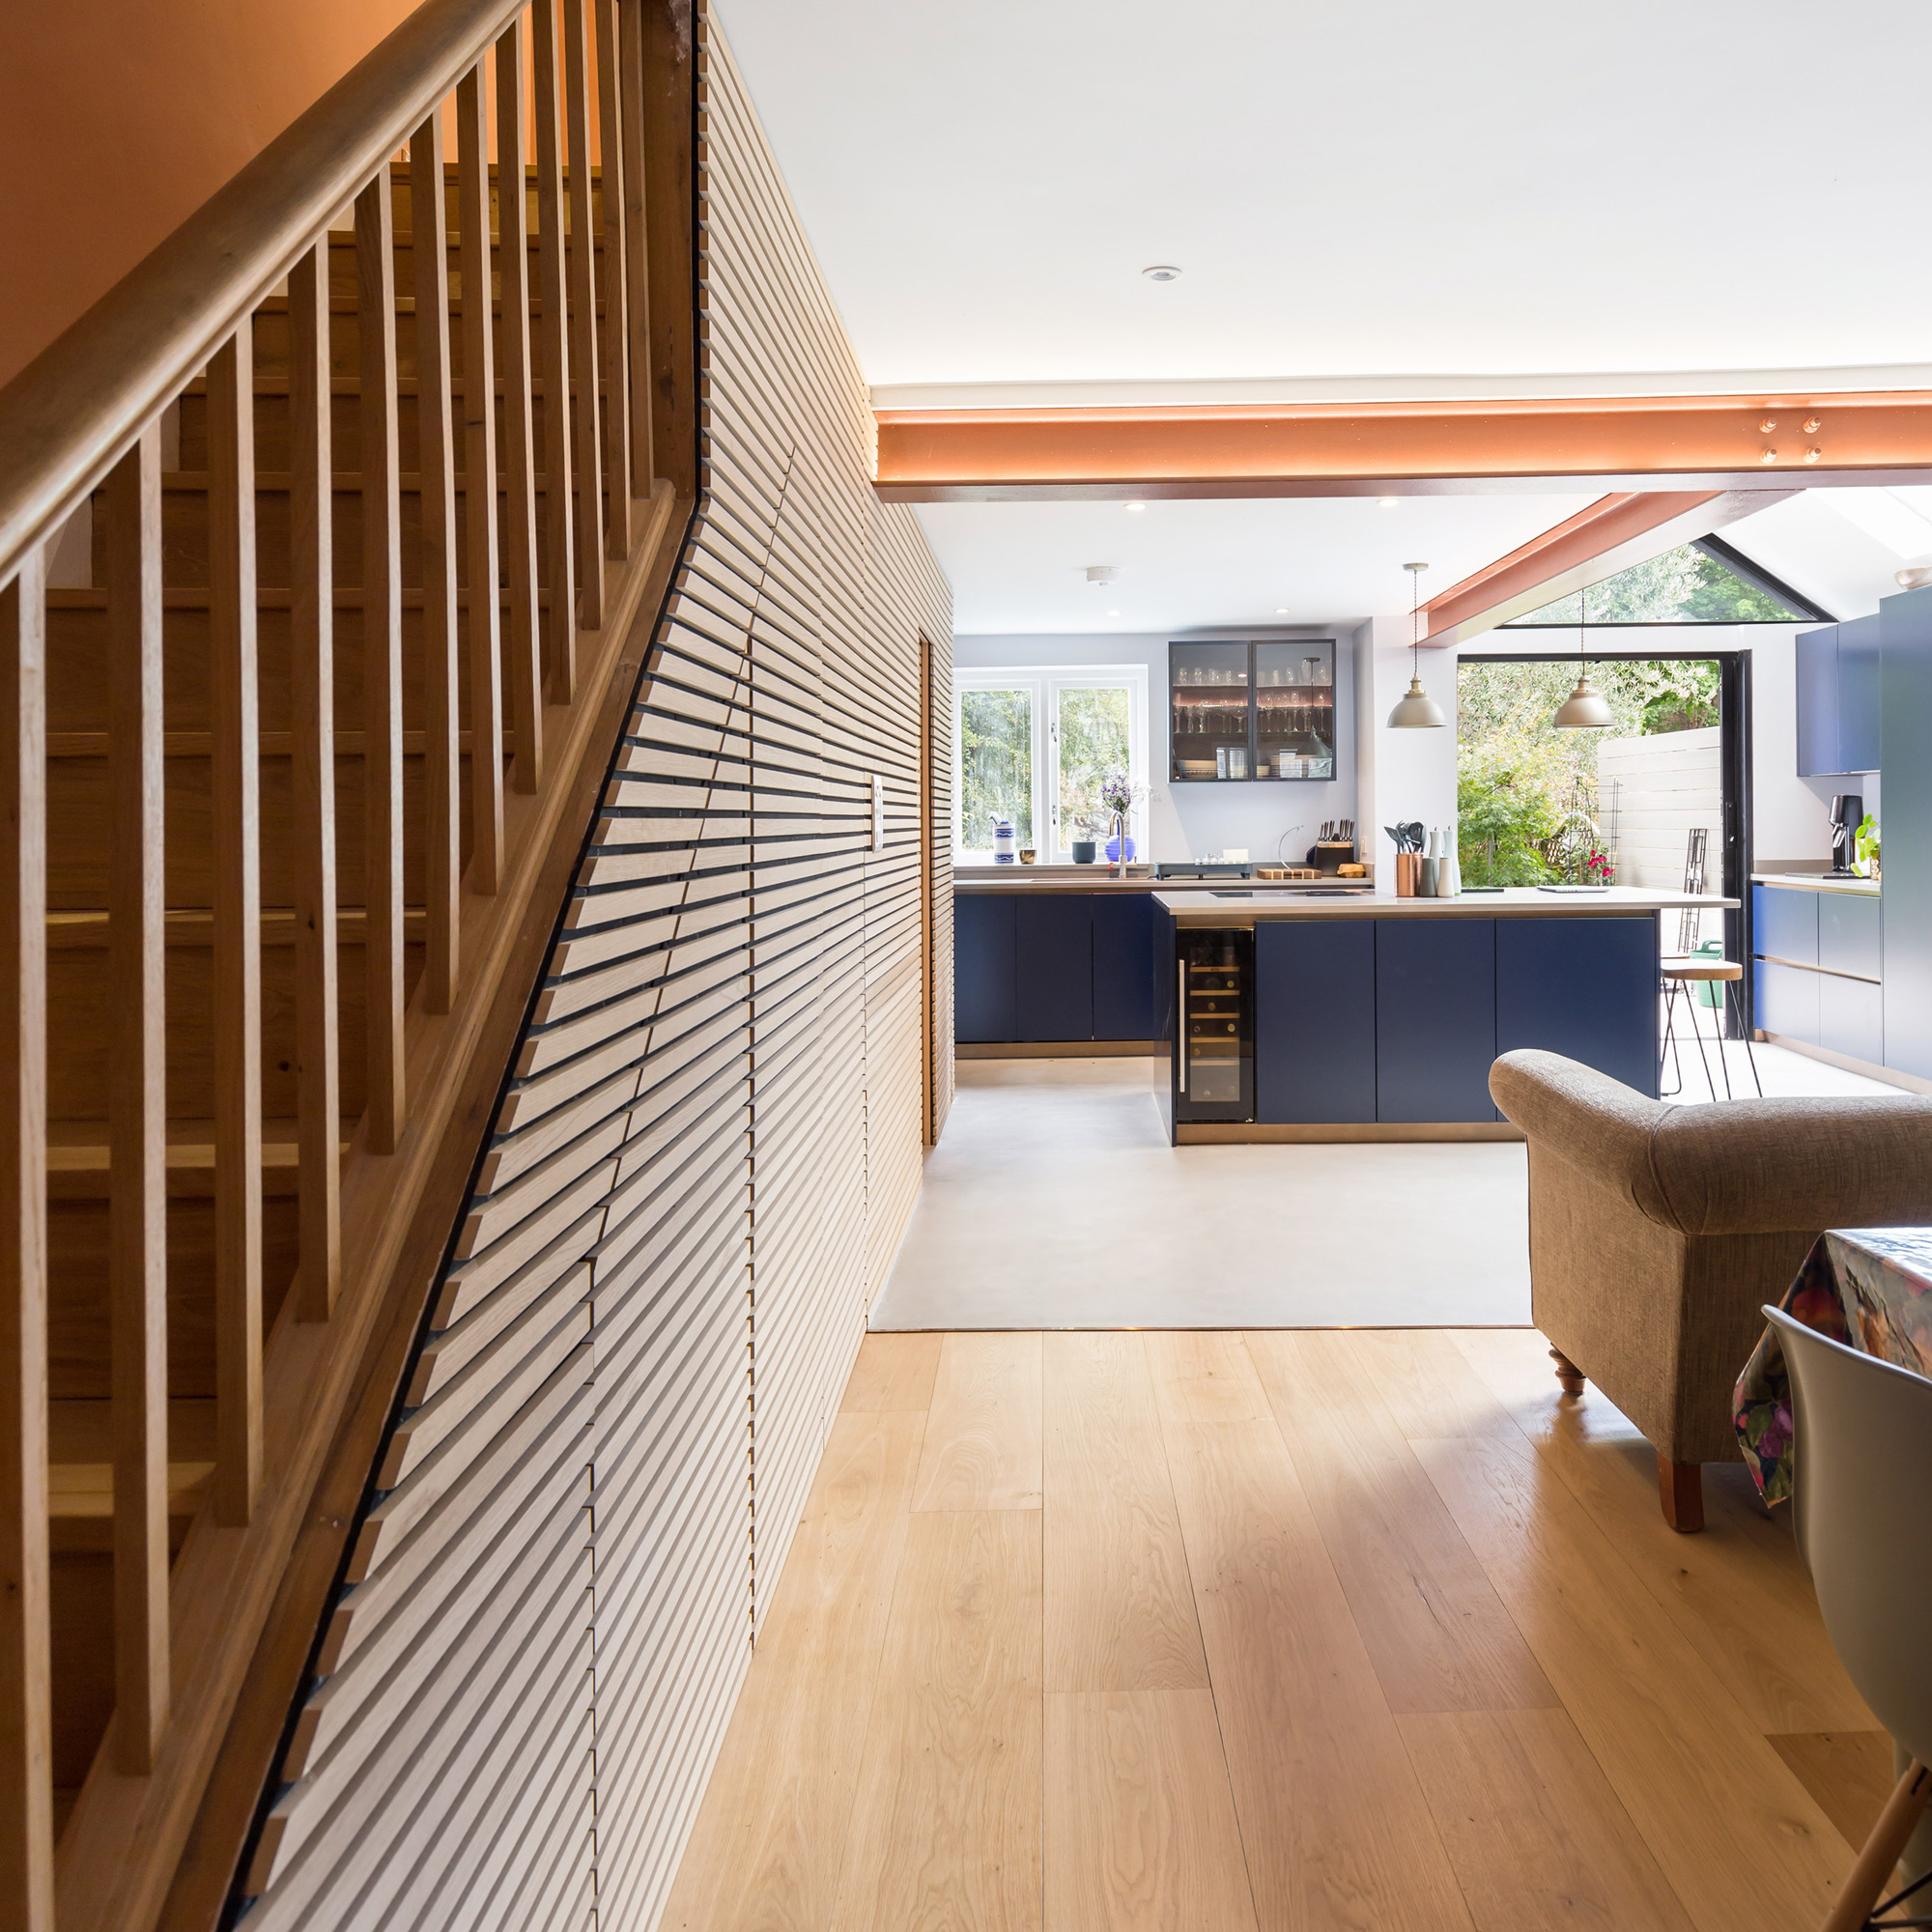 view beside the stairs into the large open plan kitchen diner